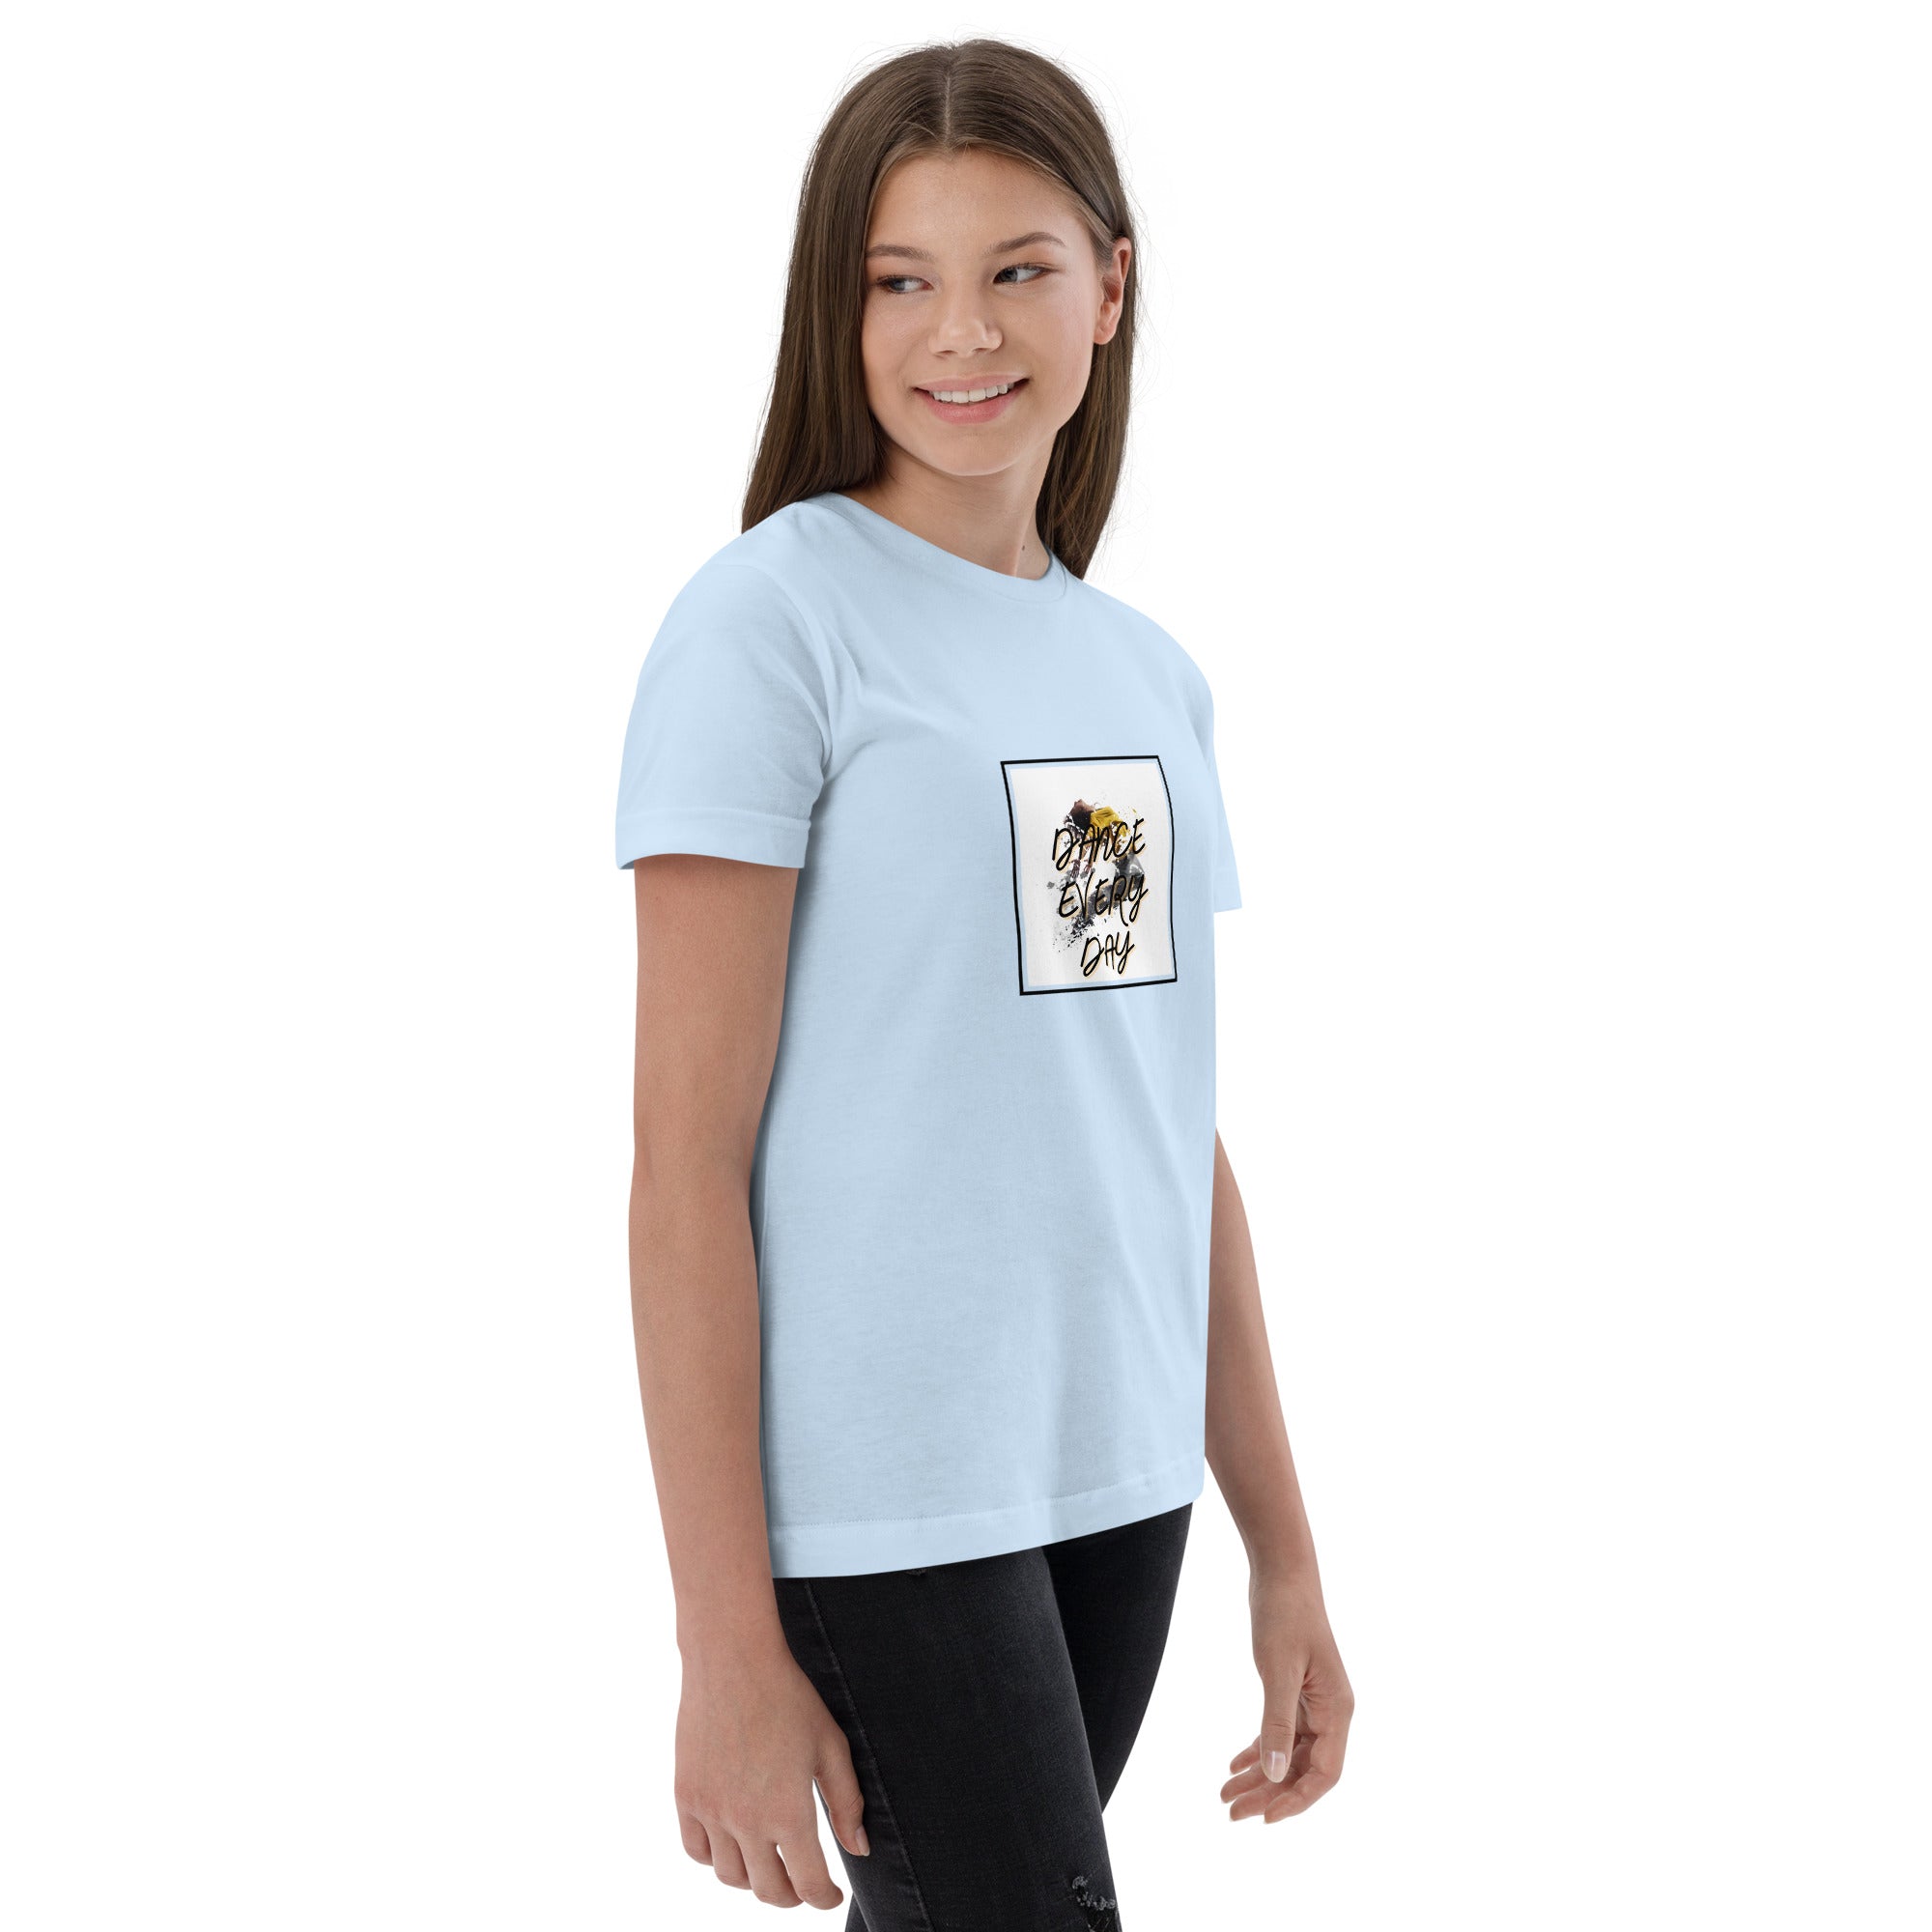 Youth jersey t-shirt Dance Every Day